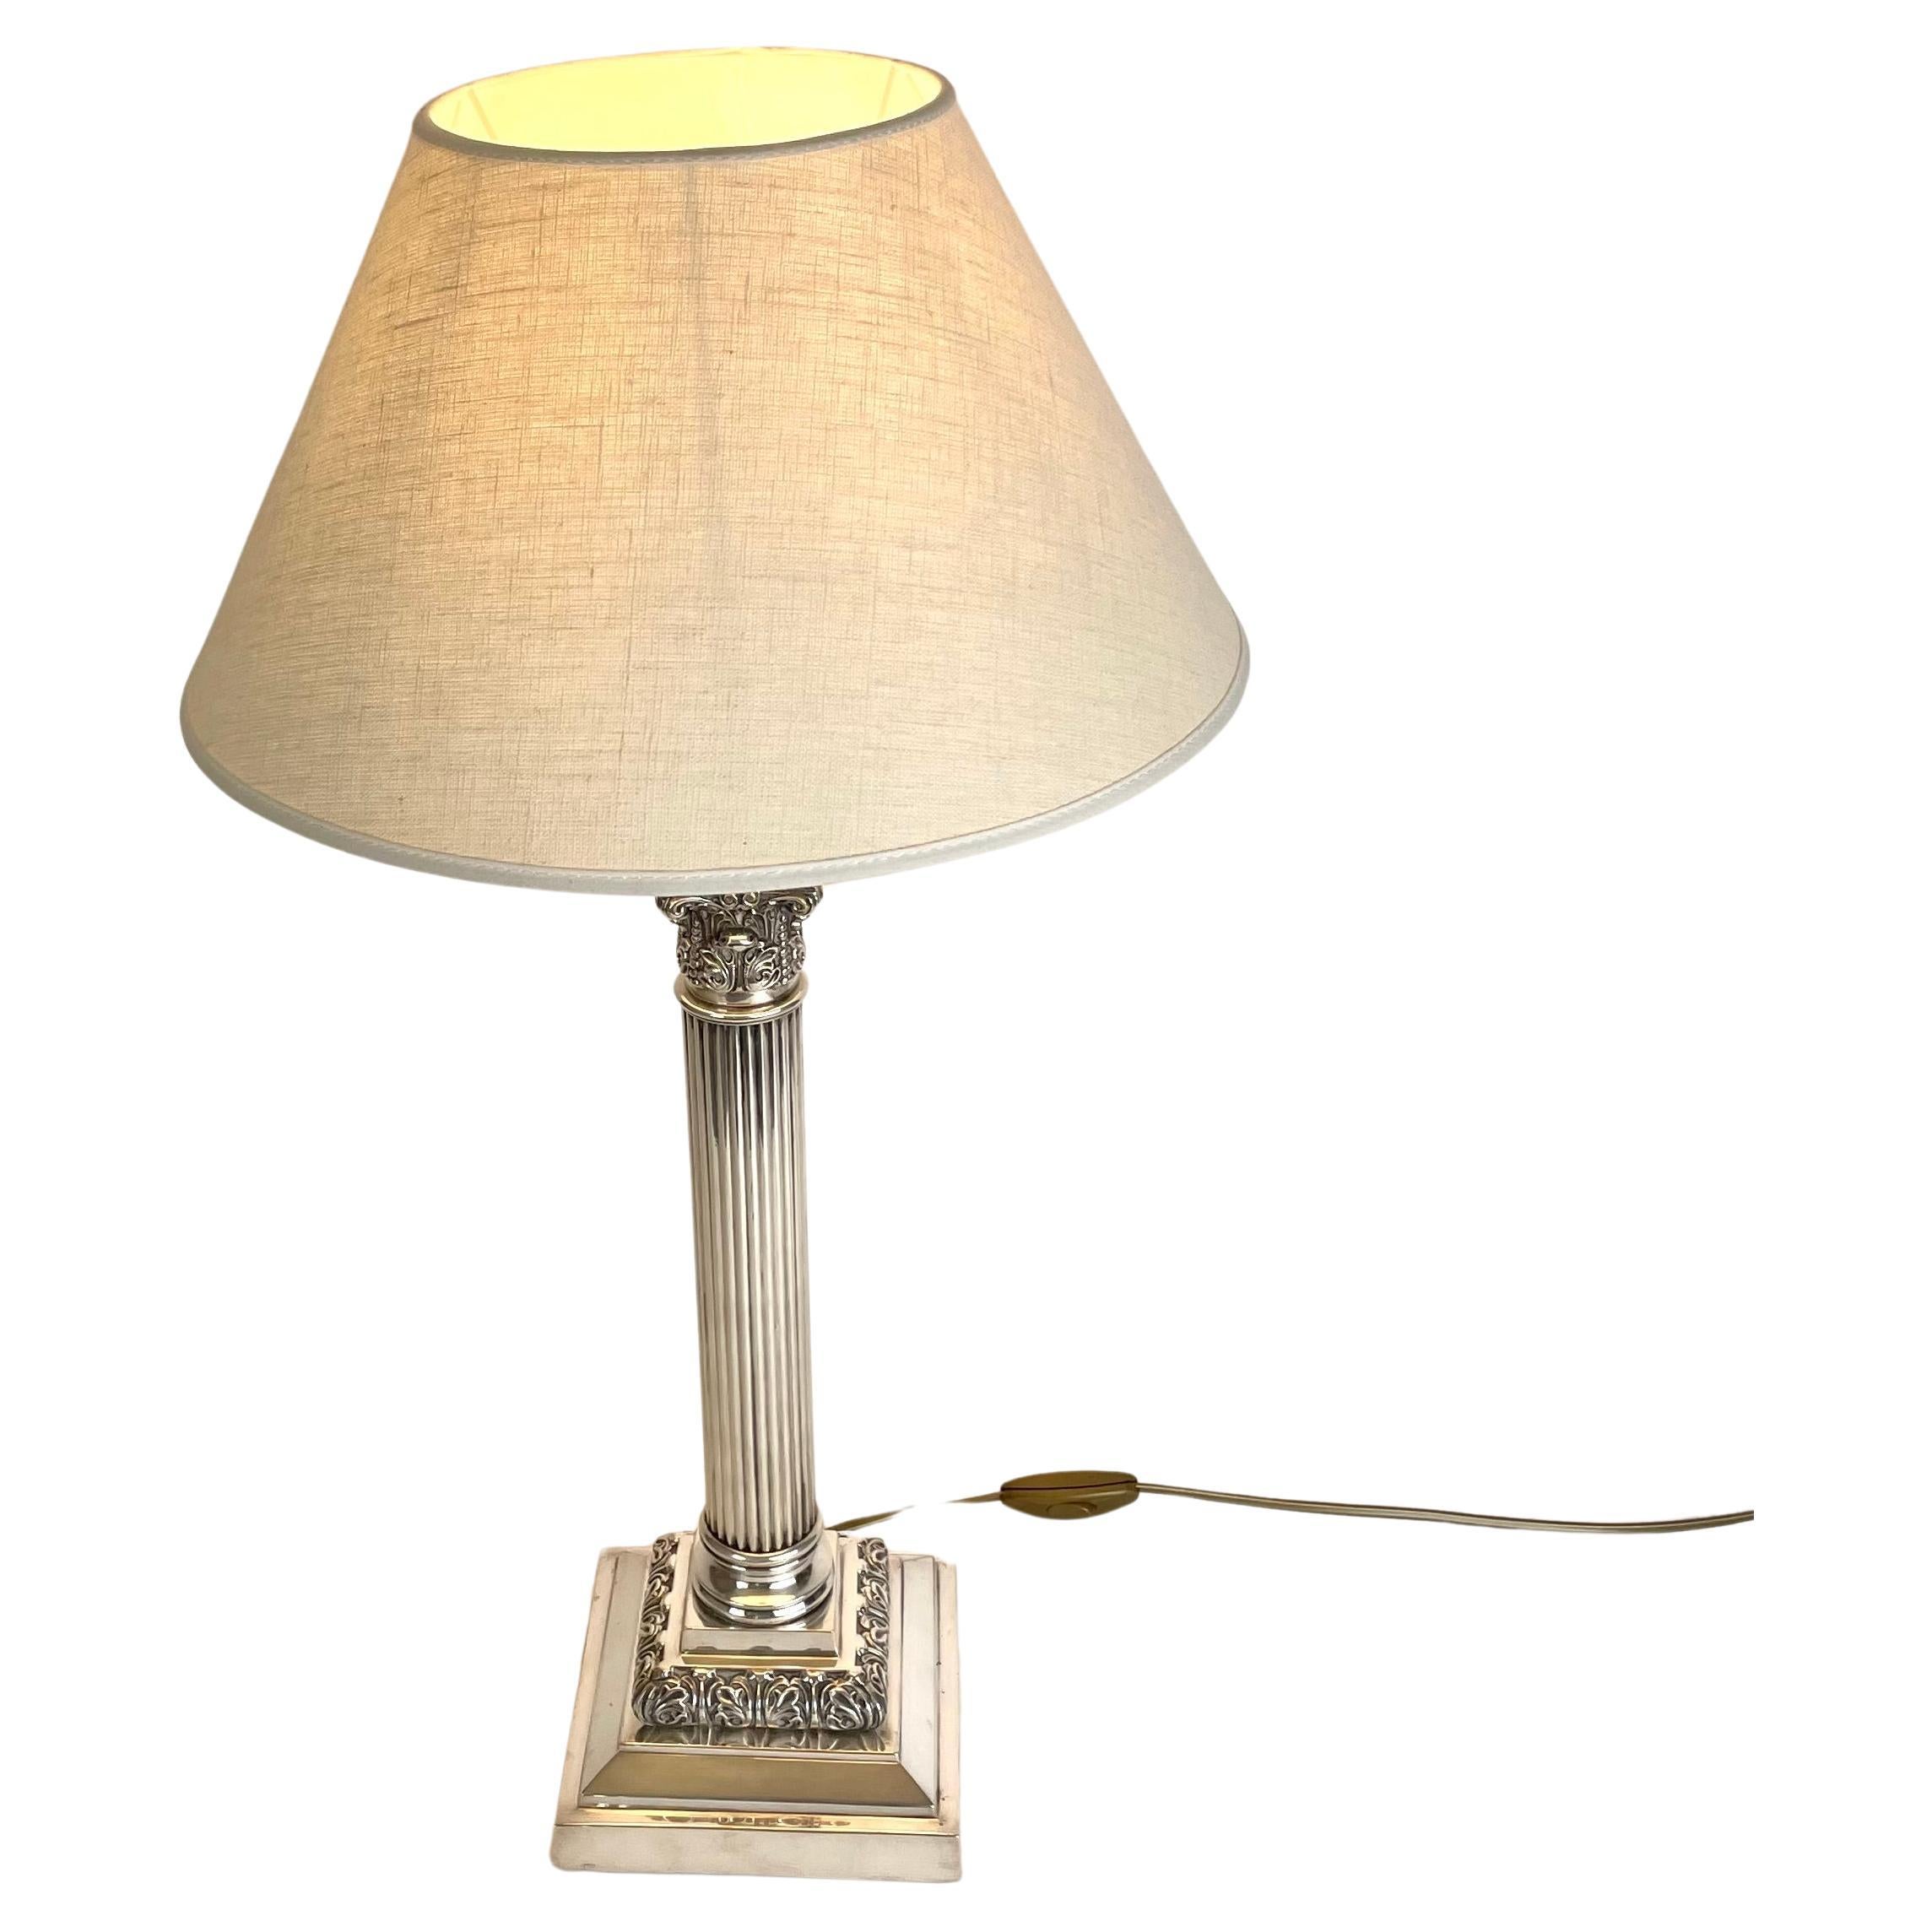 Sophisticated silver-plated Table Lamp with Classic column, late 19th Century